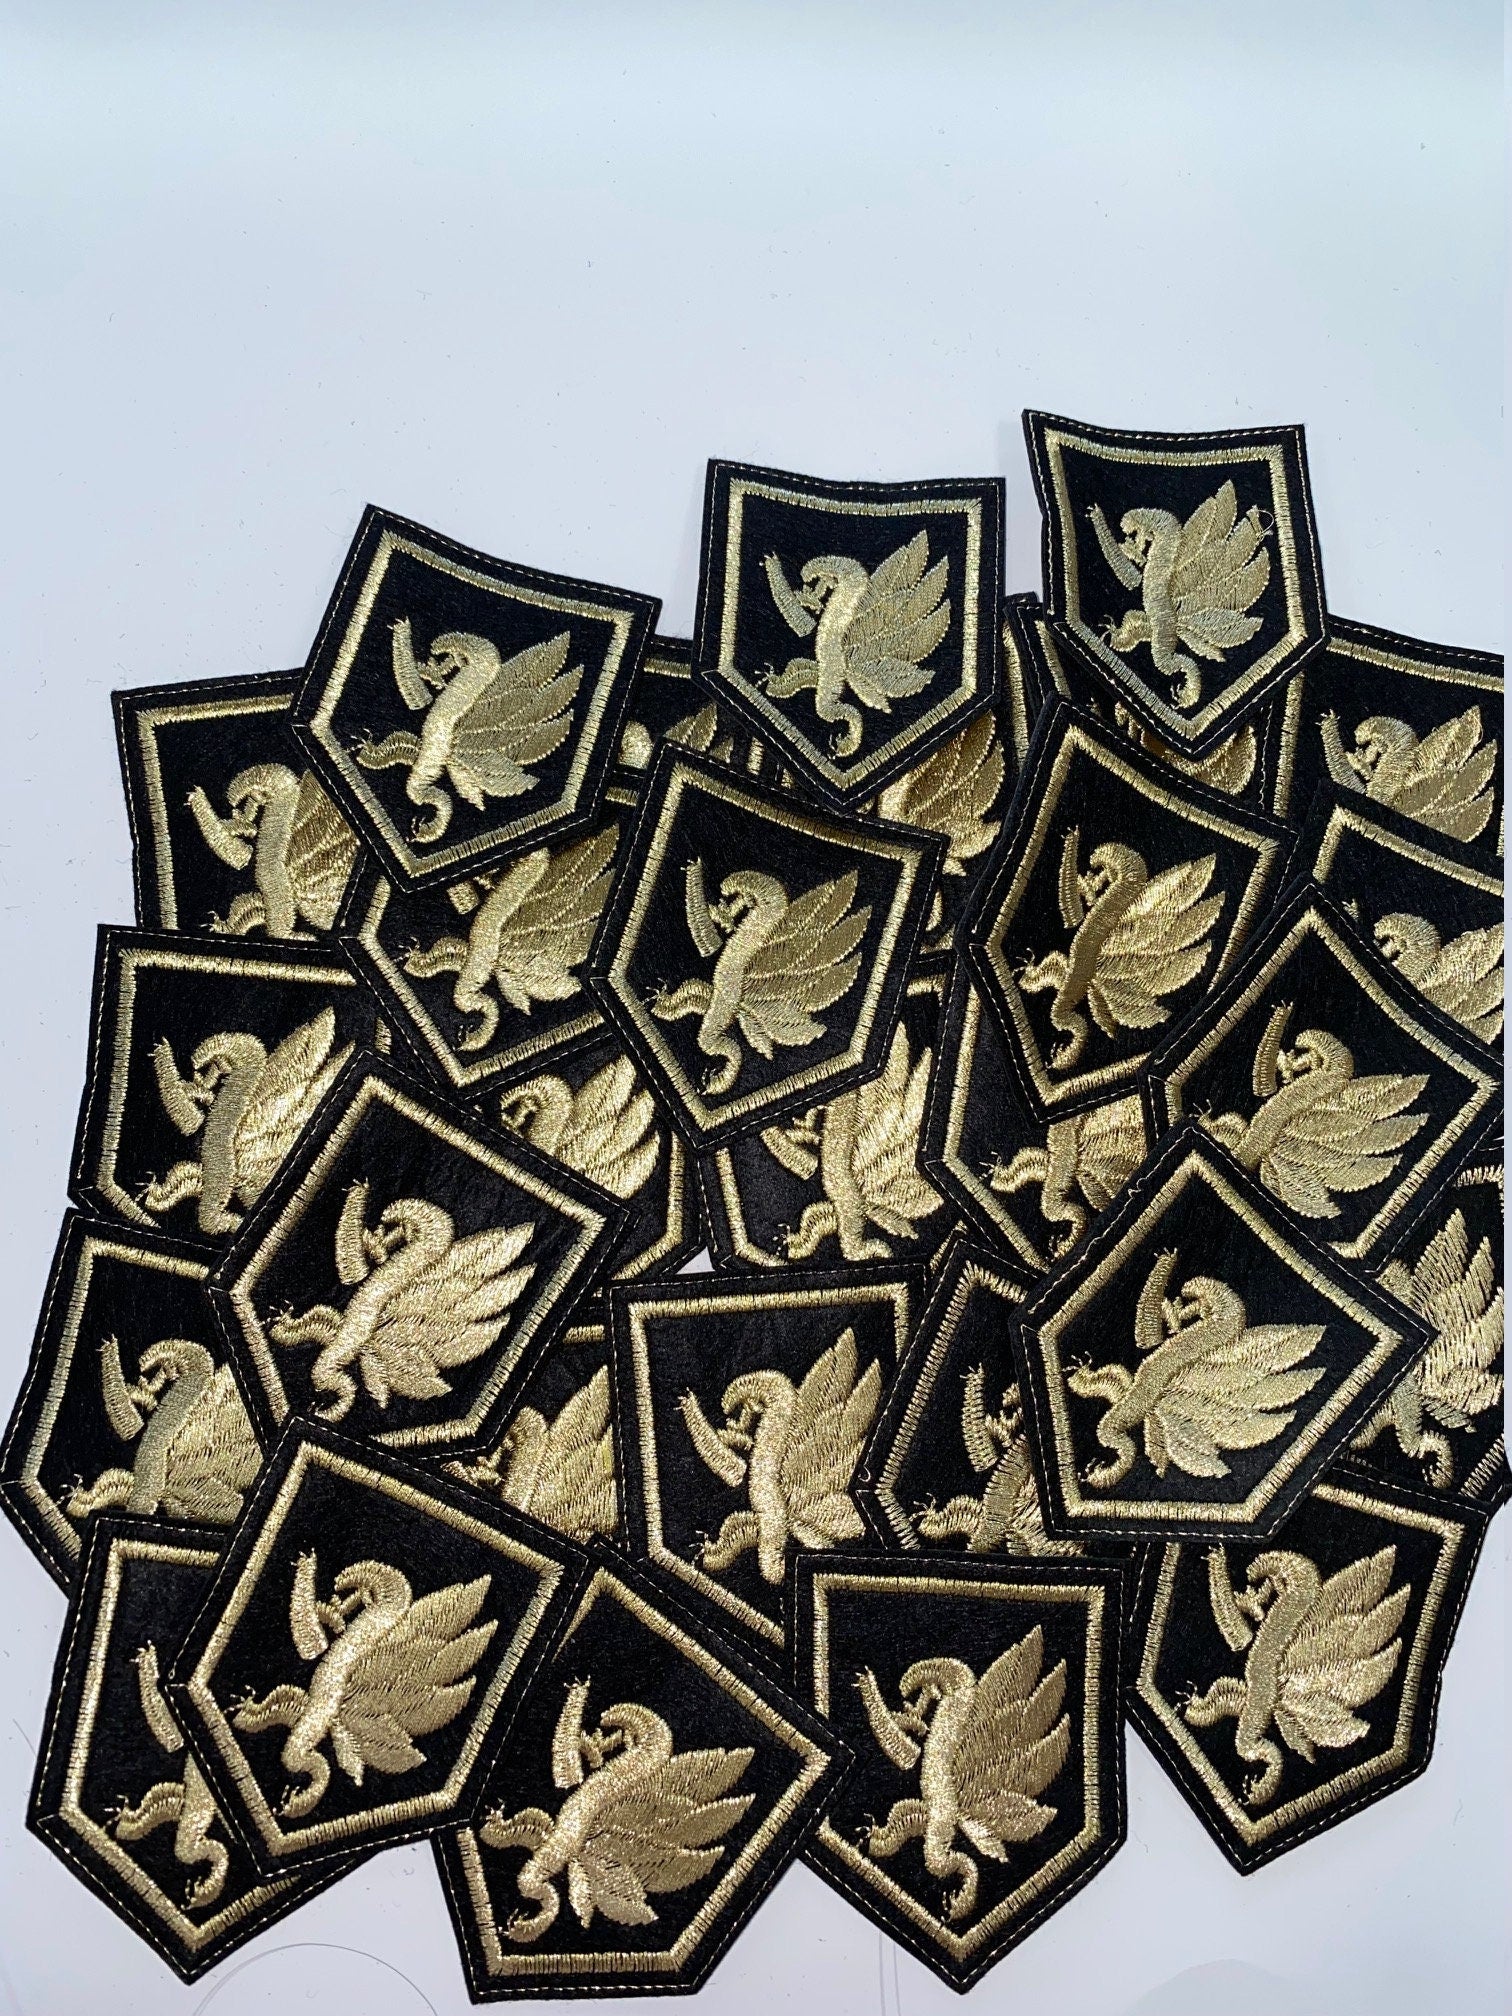 NEW ARRIVAL,Premium Quality, Royalty Crest, Gold and Black Metallic Emblem patch, DIY, Embroidered Applique Iron On Patch, Size 3"